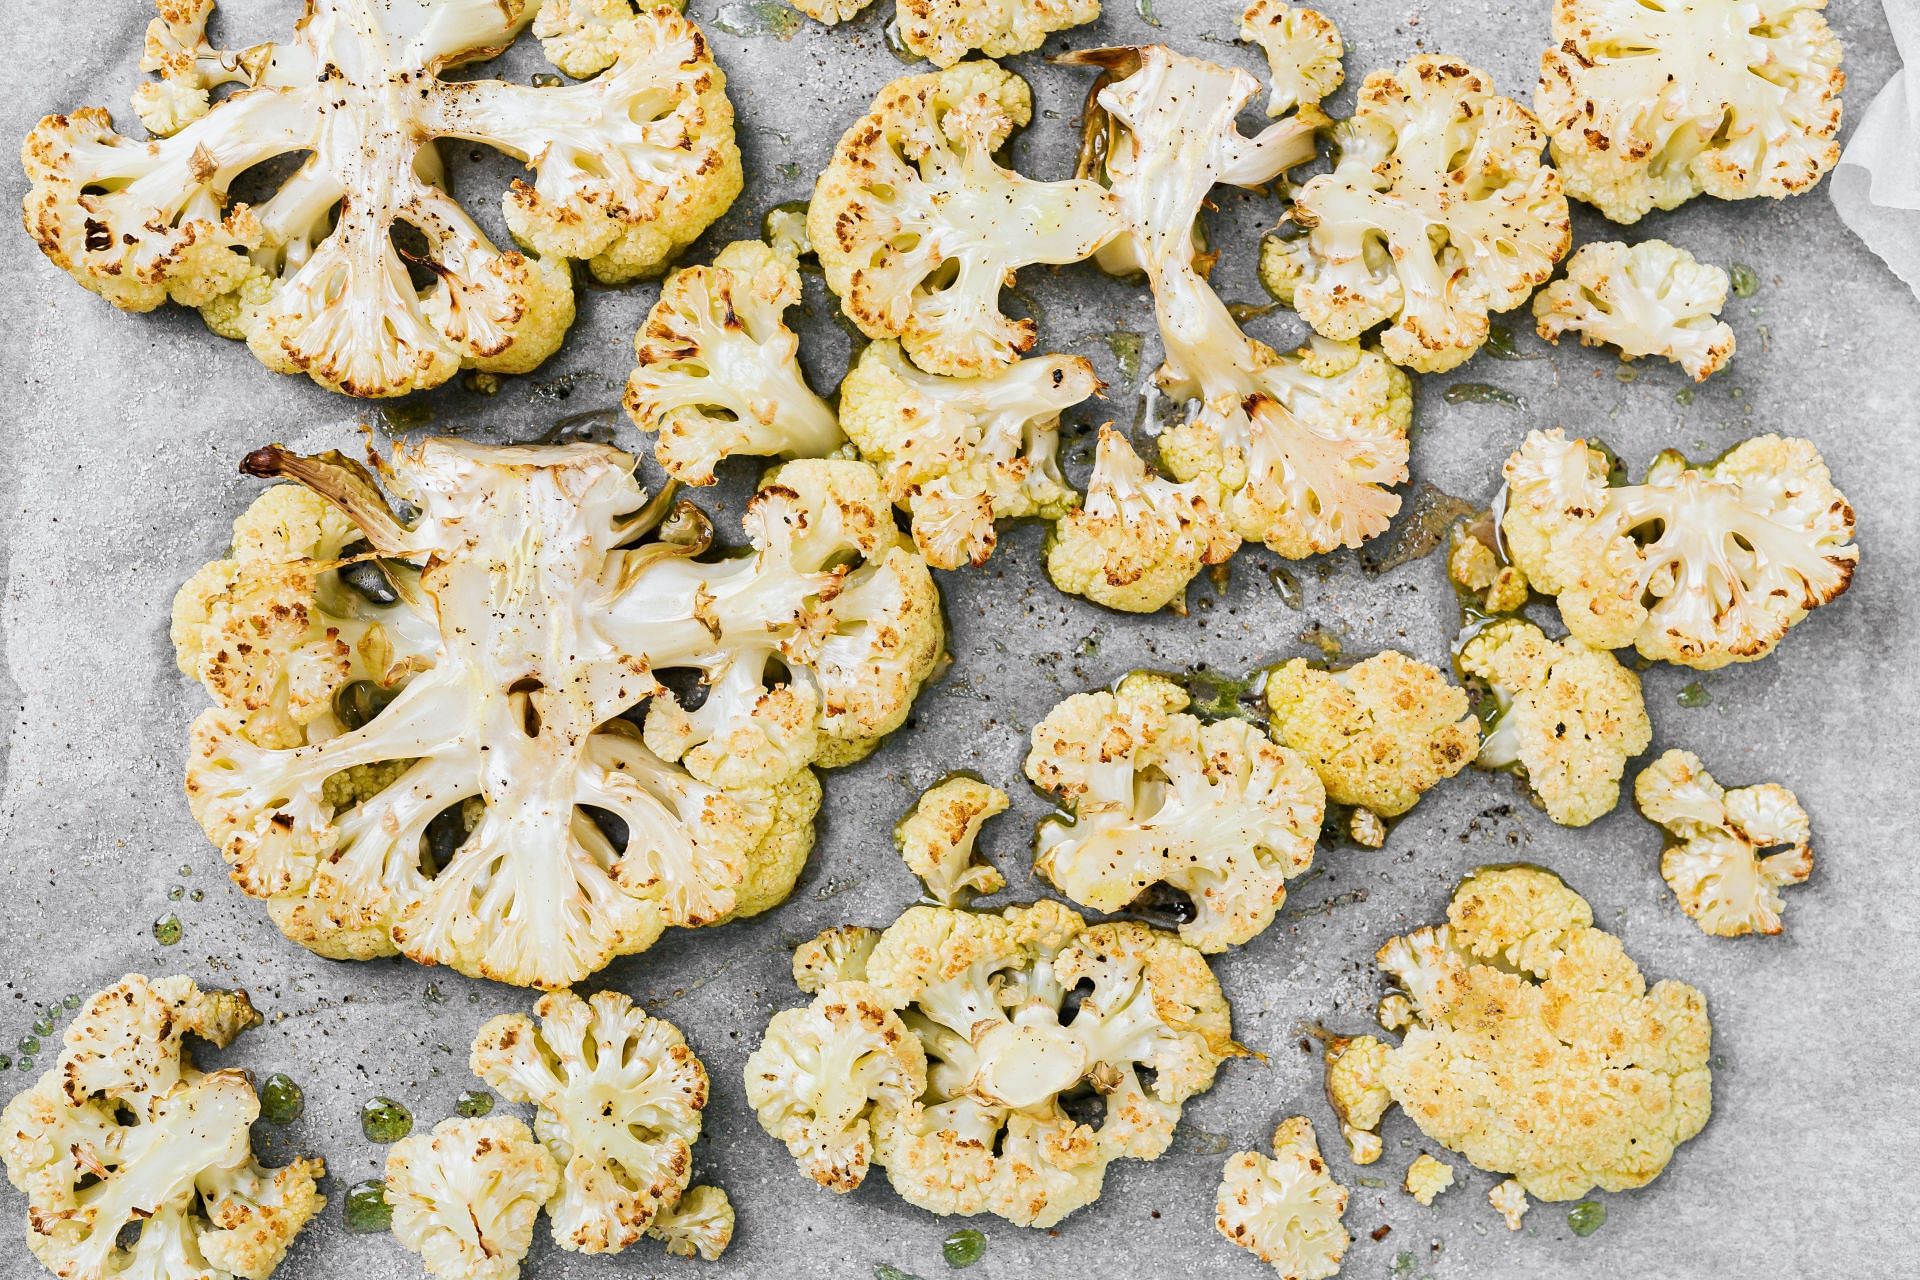 What are the health benefits of cauliflower? Check the nutritional value of cauliflower. (Image via Pexels)